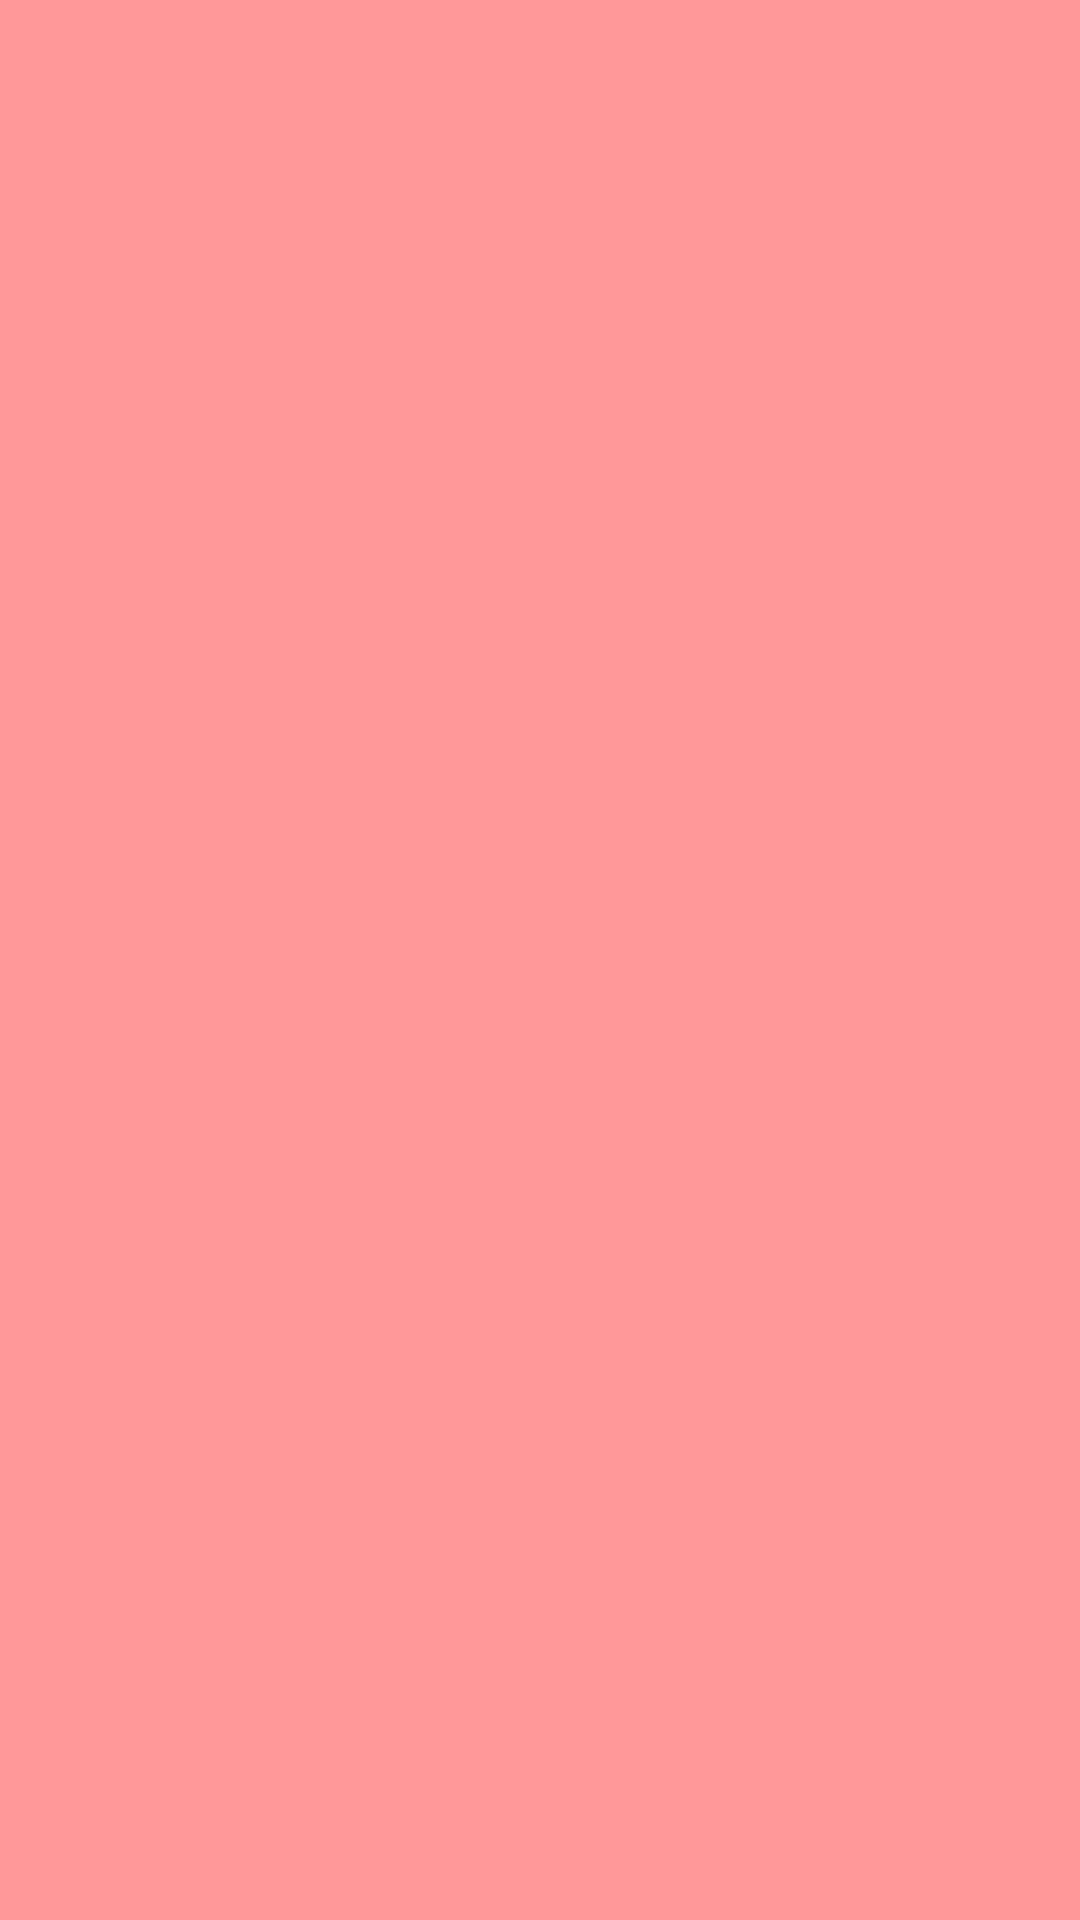 1080x1920 Light Salmon Pink Solid Color Background